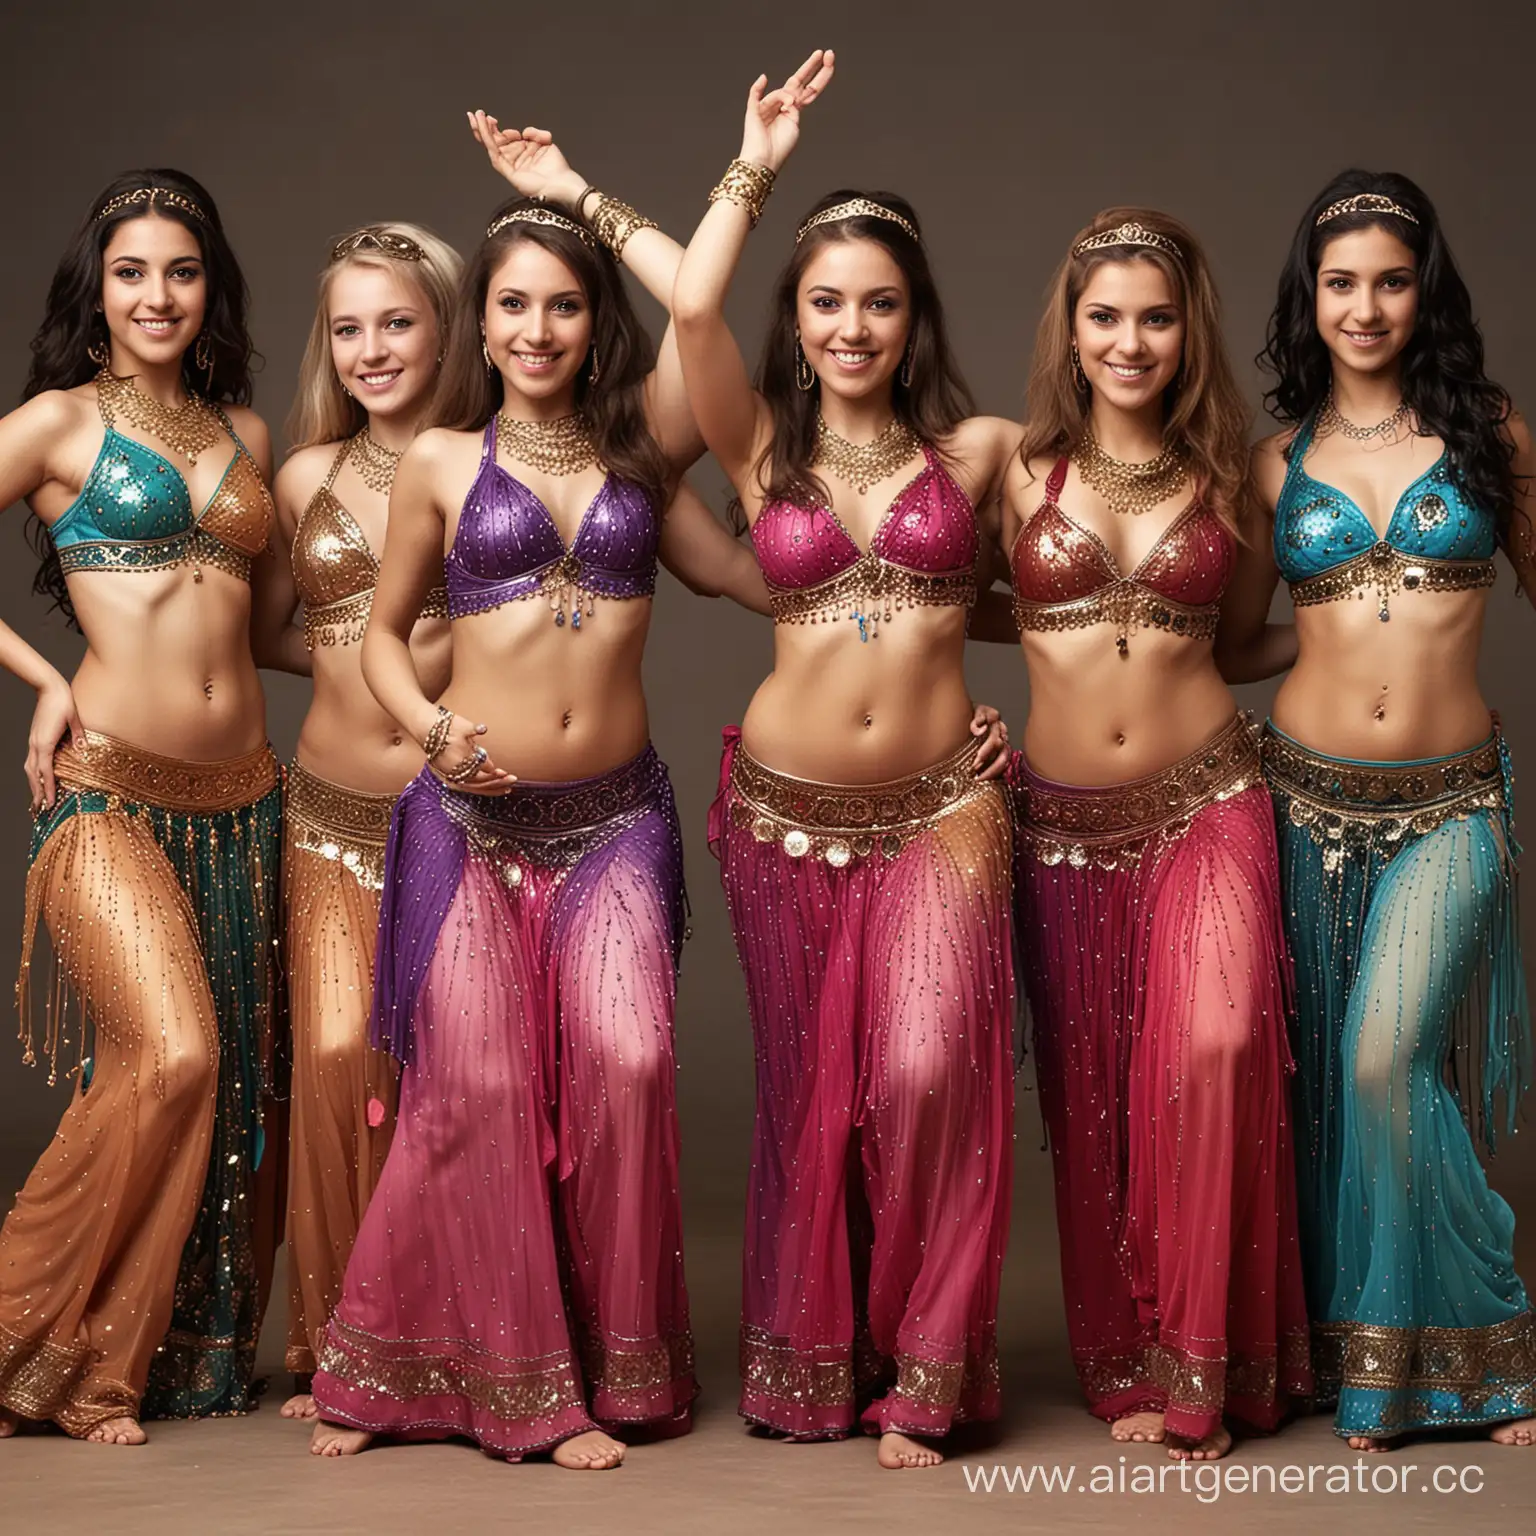 Graceful-Girls-Performing-Traditional-Belly-Dance